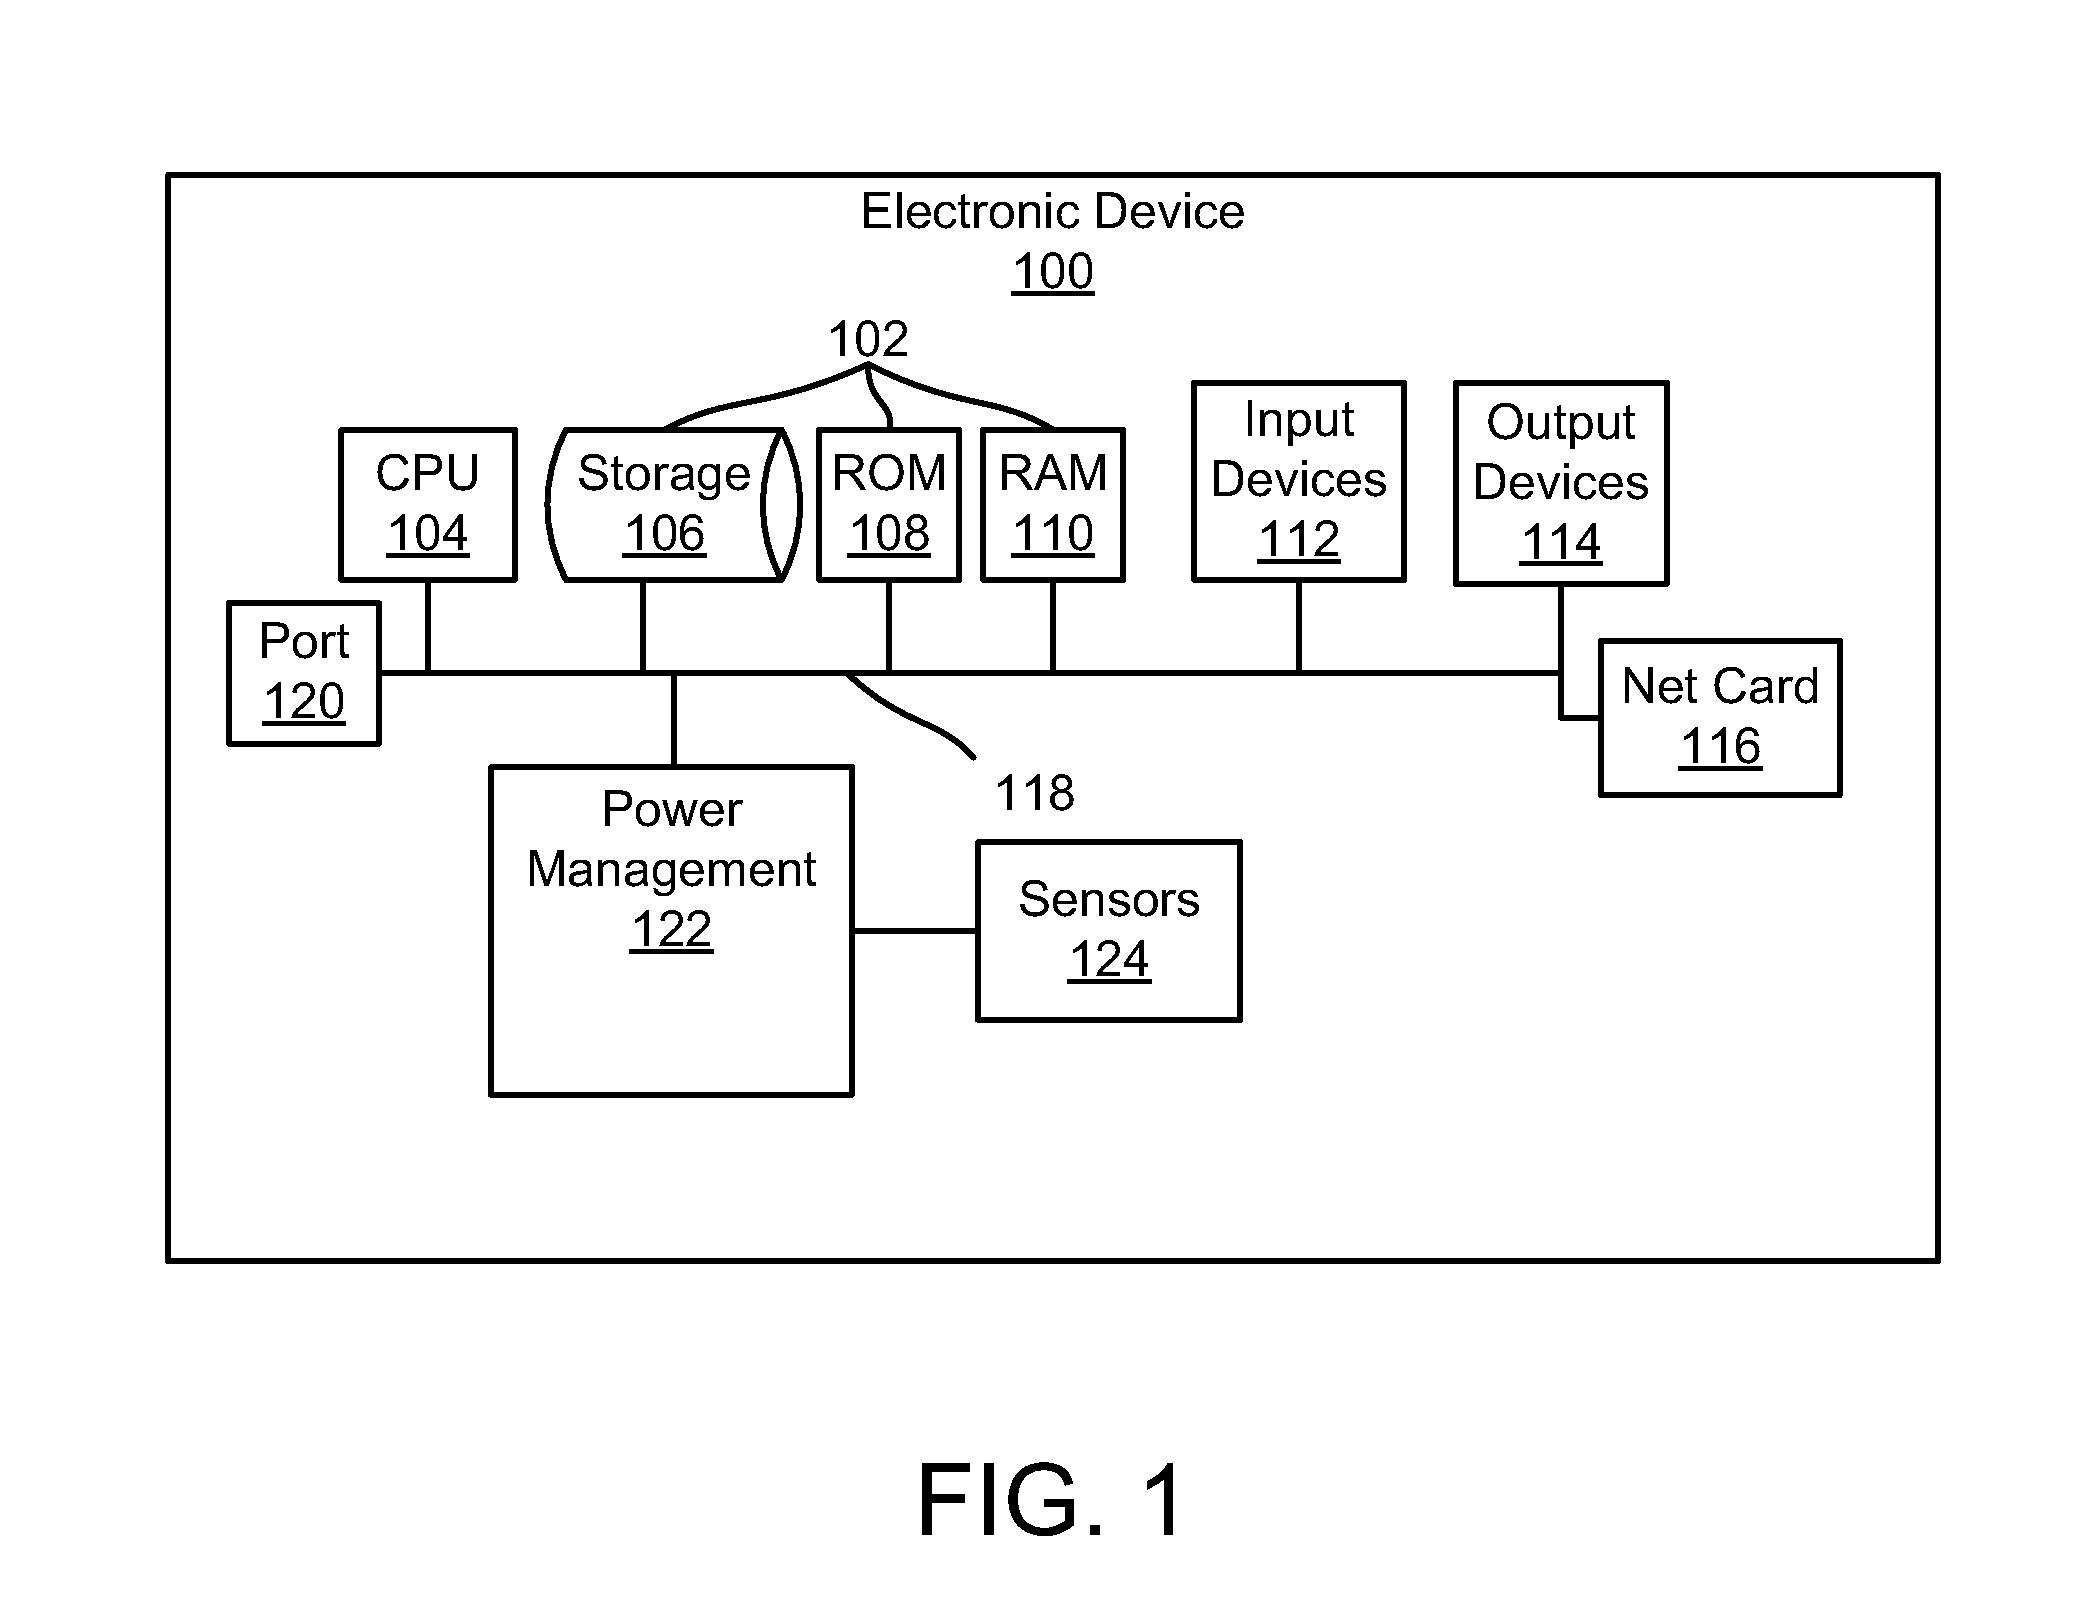 Apparatus, system, and method for improved type-ahead functionality in a type-ahead field based on activity of a user within a user interface